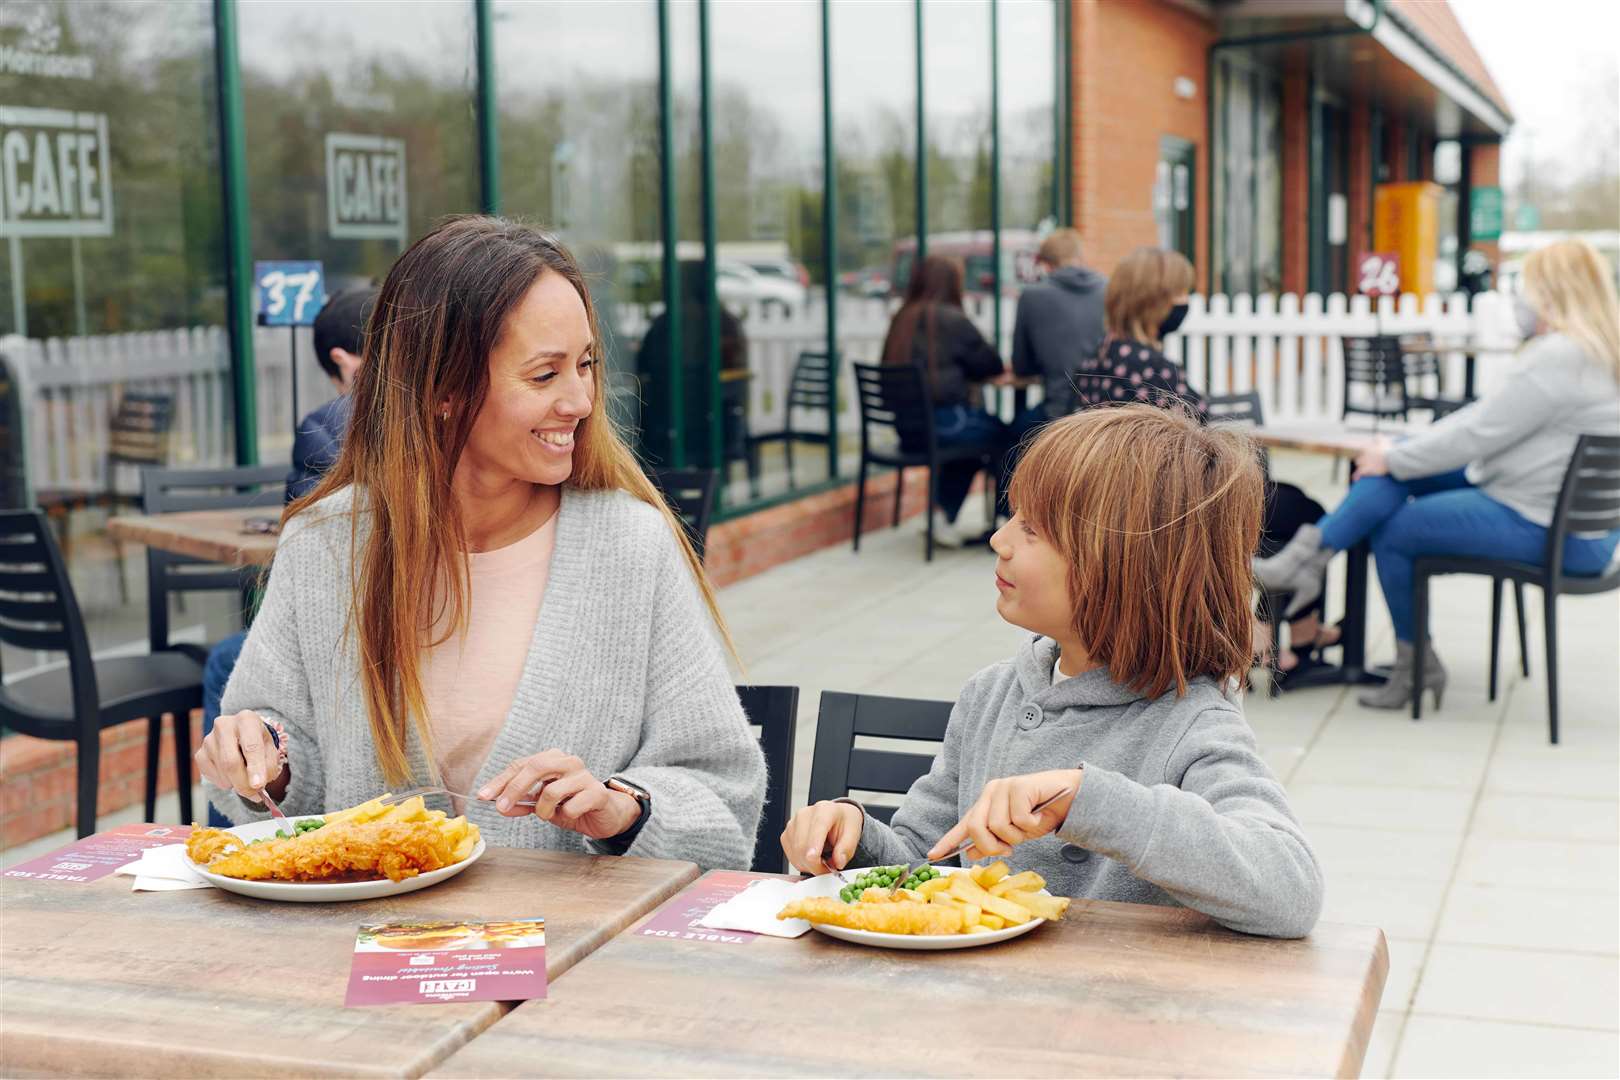 Cafes and restaurants are offering Kids Eat Free deals across half term